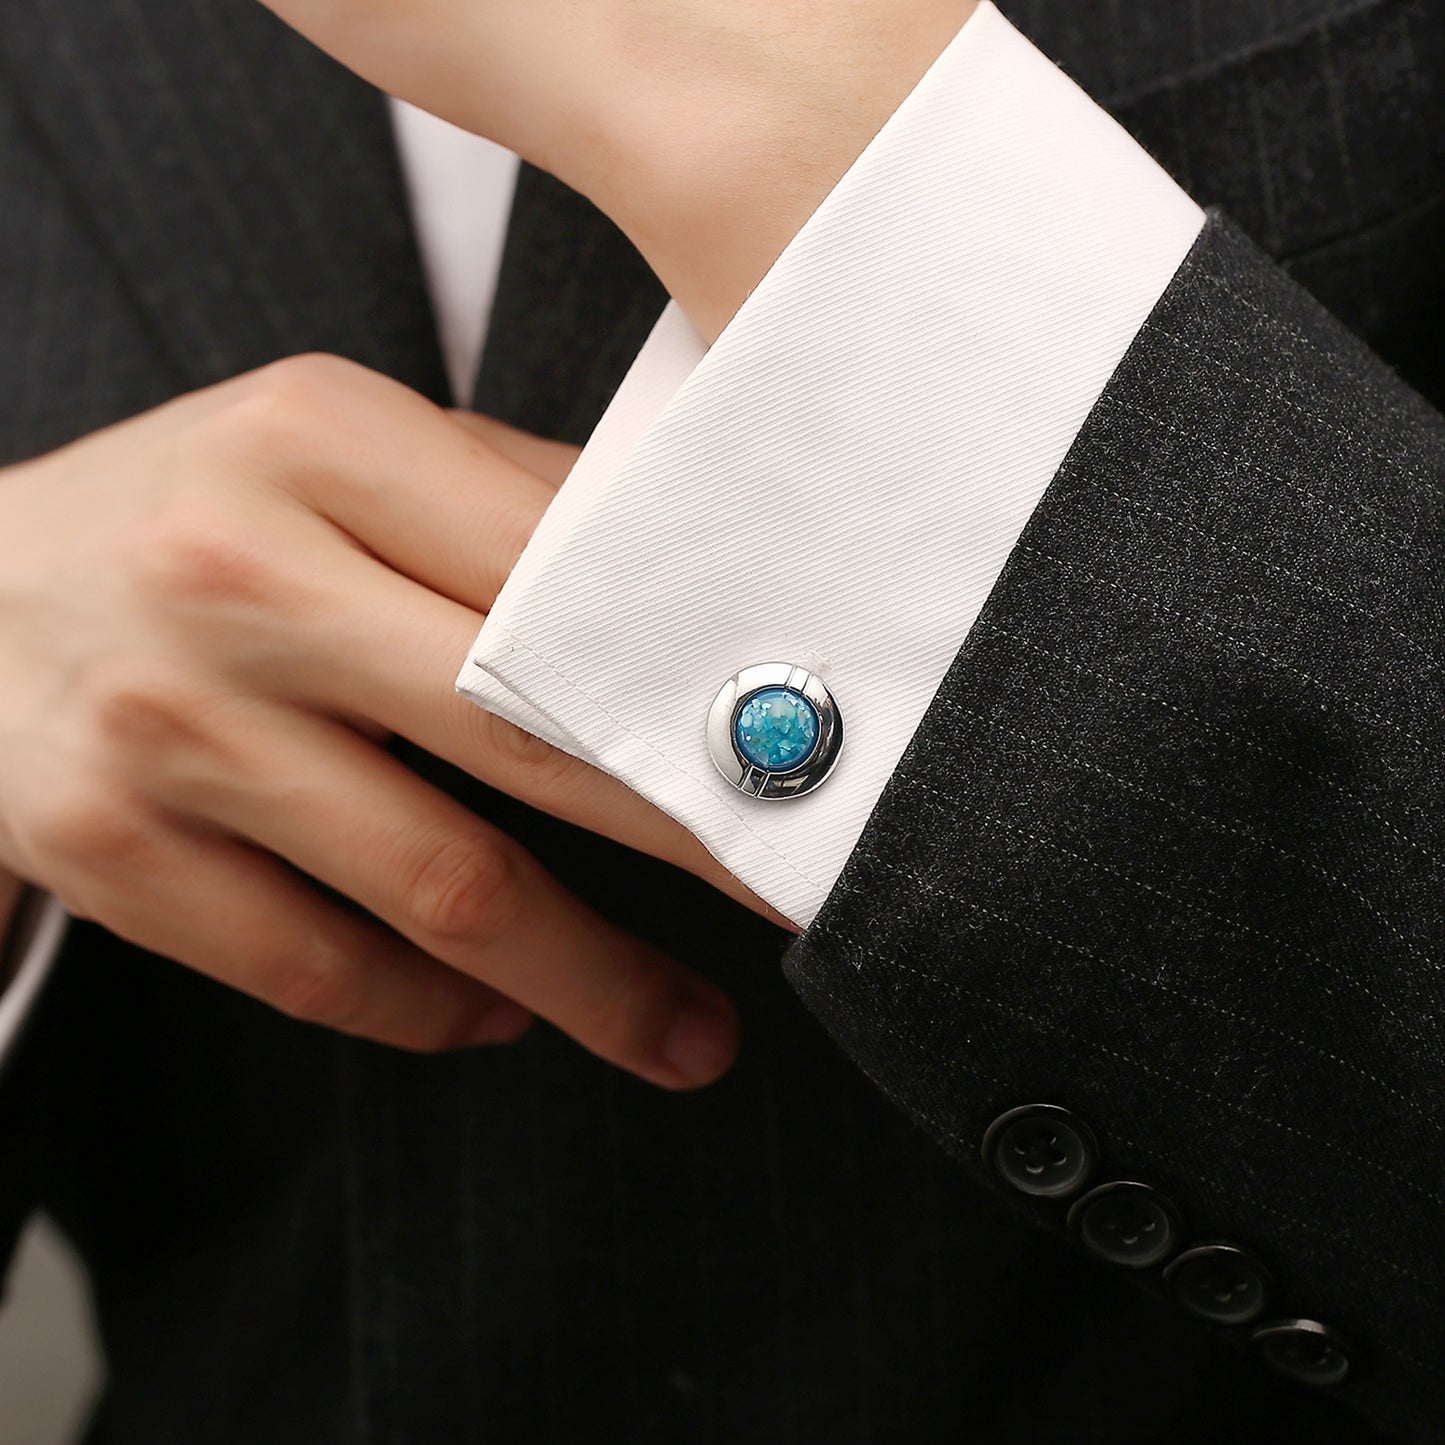 Round French Shirt Cufflinks Inlaid With Sky Blue Crystals